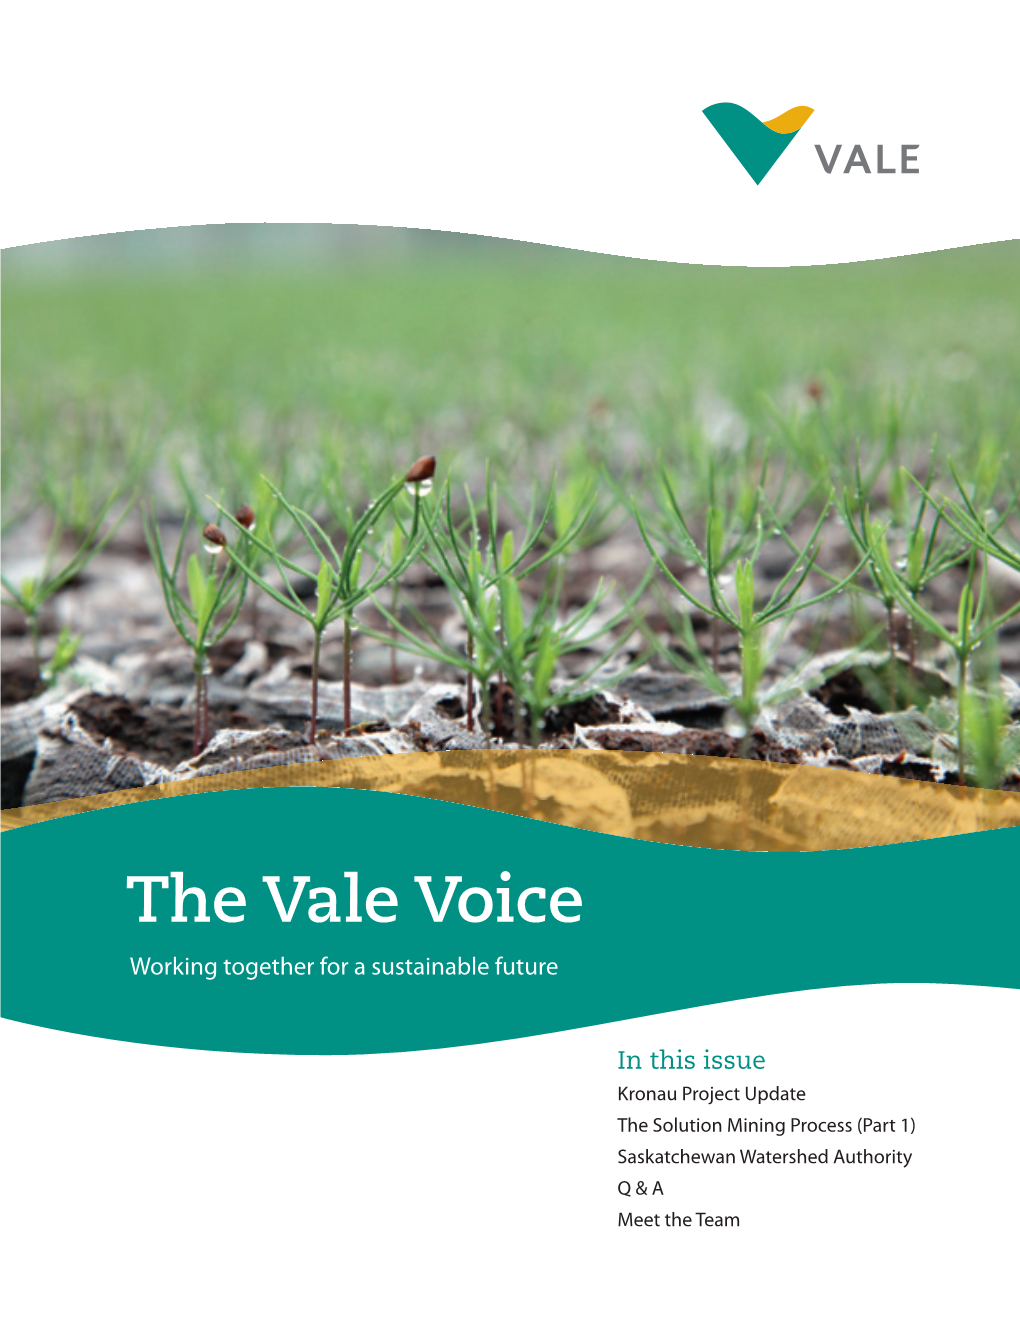 The Vale Voice Working Together for a Sustainable Future